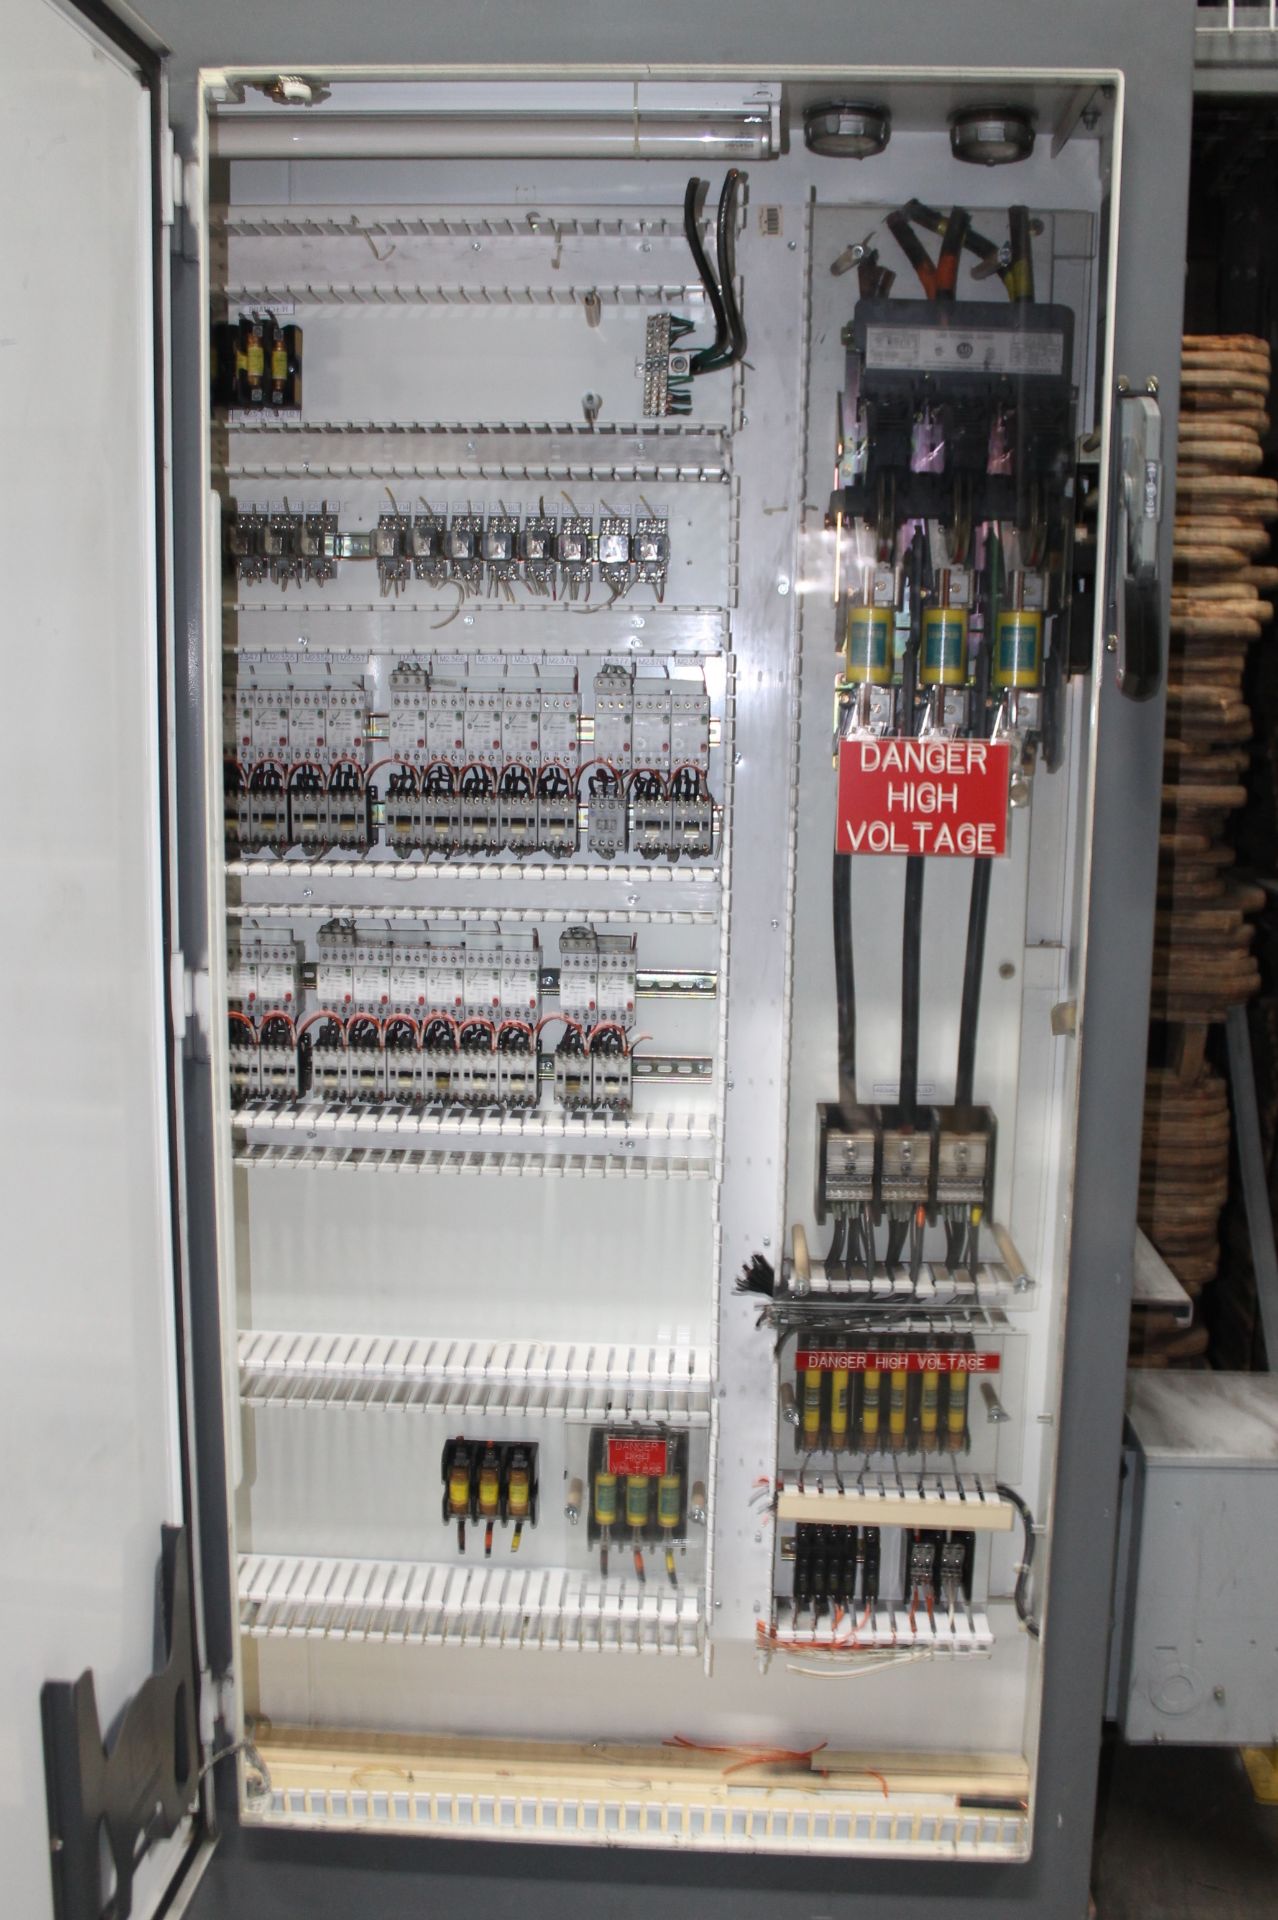 BUSCHMAN CONVEYOR AUTOMATION CONTROL PANEL CABINET WITH CONTROLS, CABINET SIZE: 90"L X 20"W X 87"H - Image 7 of 12